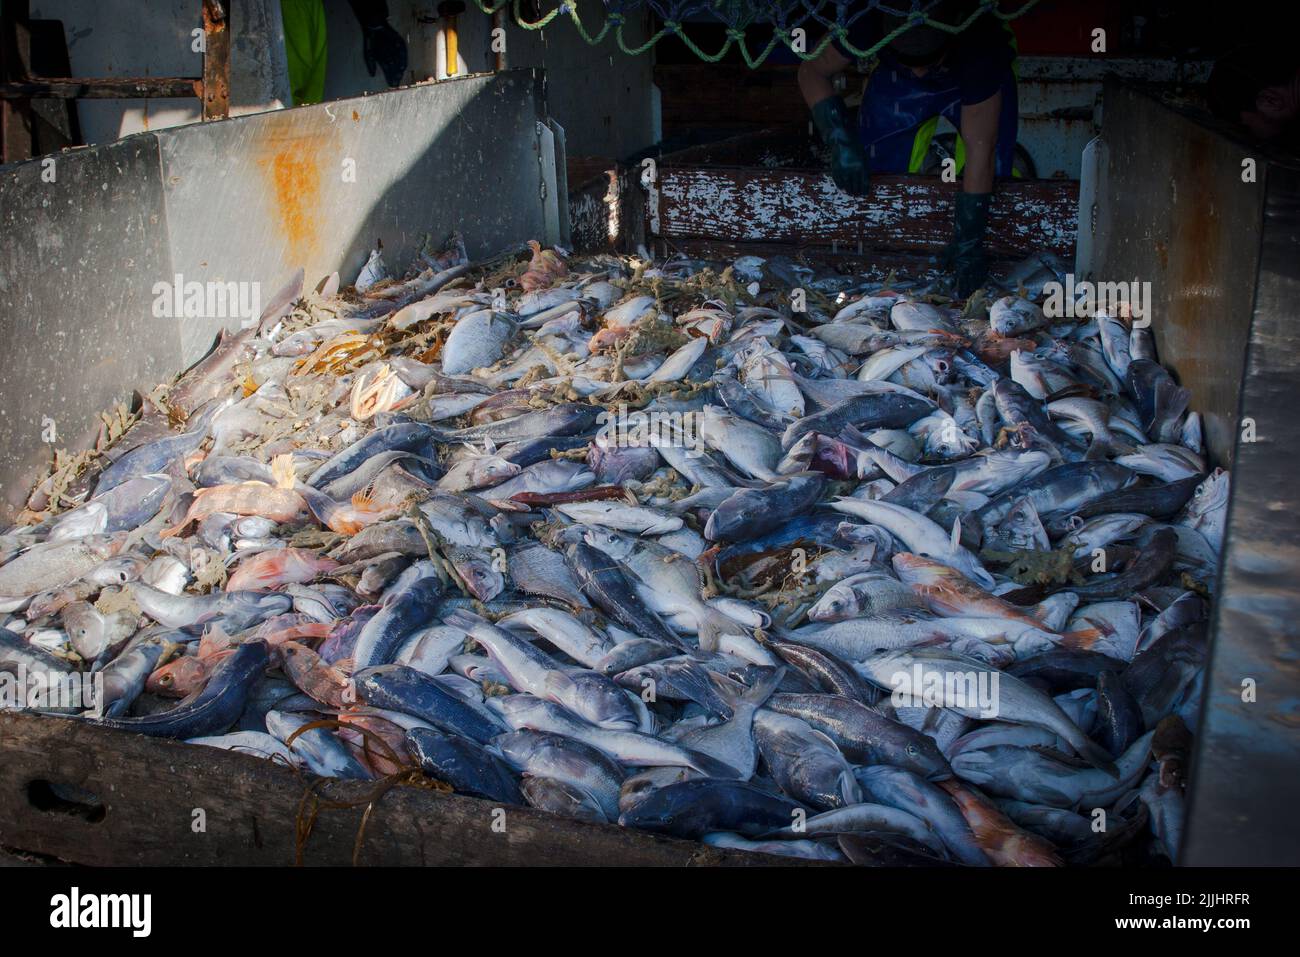 A Look at life in New Zealand: Freshly landed catch, from a deep-sea fishing trawler: Stock Photo